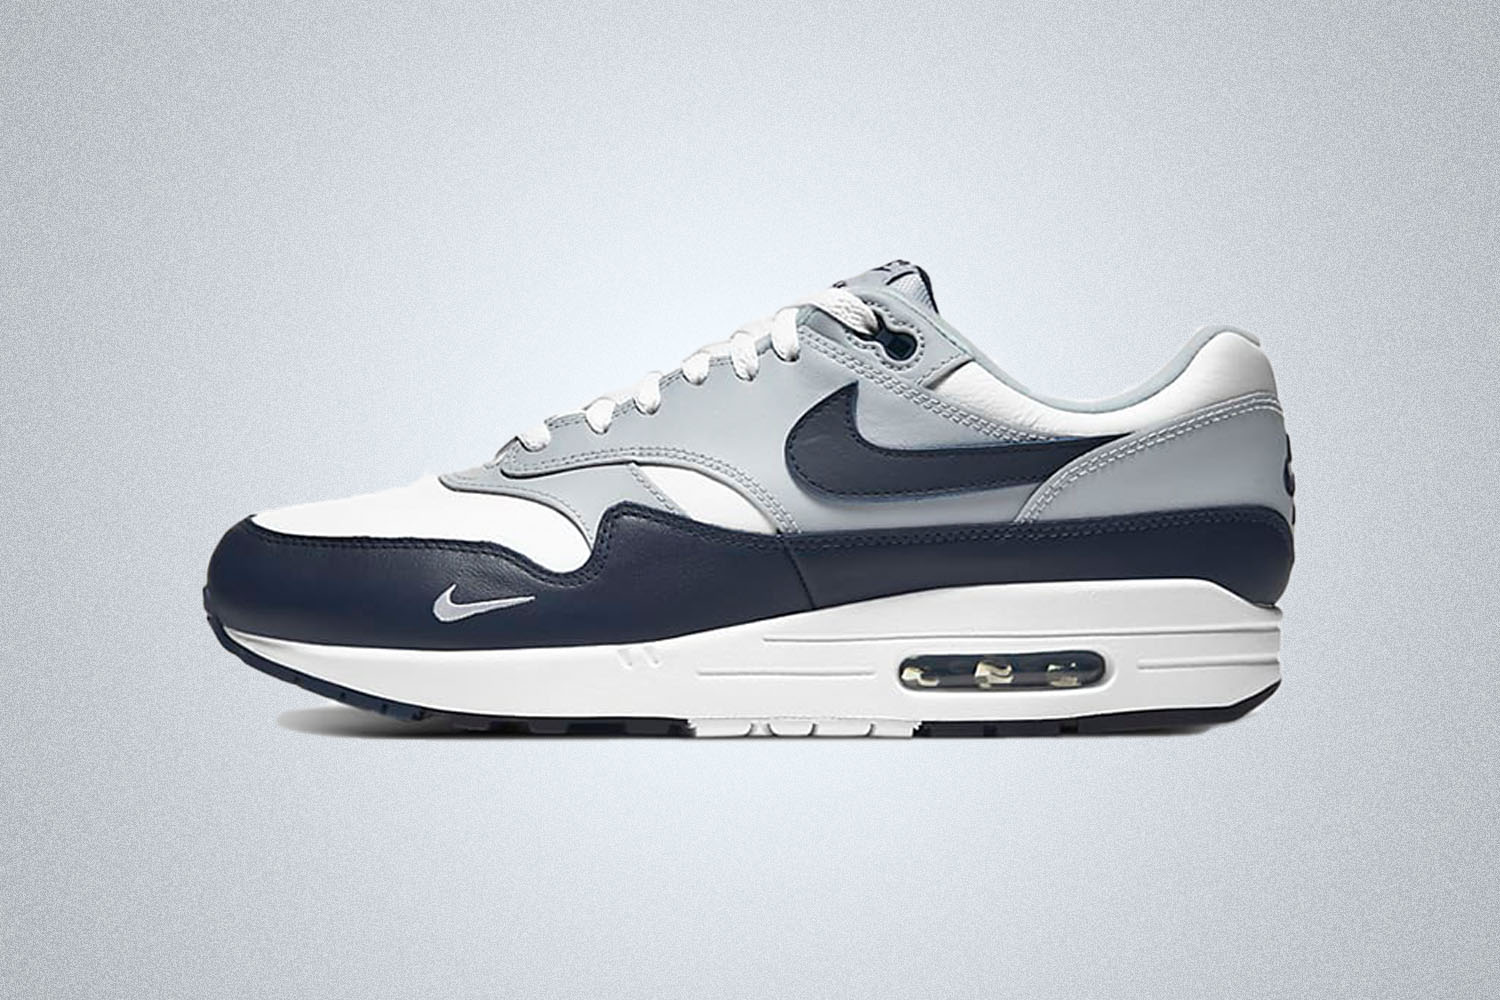 Which Nike Air Max Sneaker Model The Most Comfortable? - InsideHook